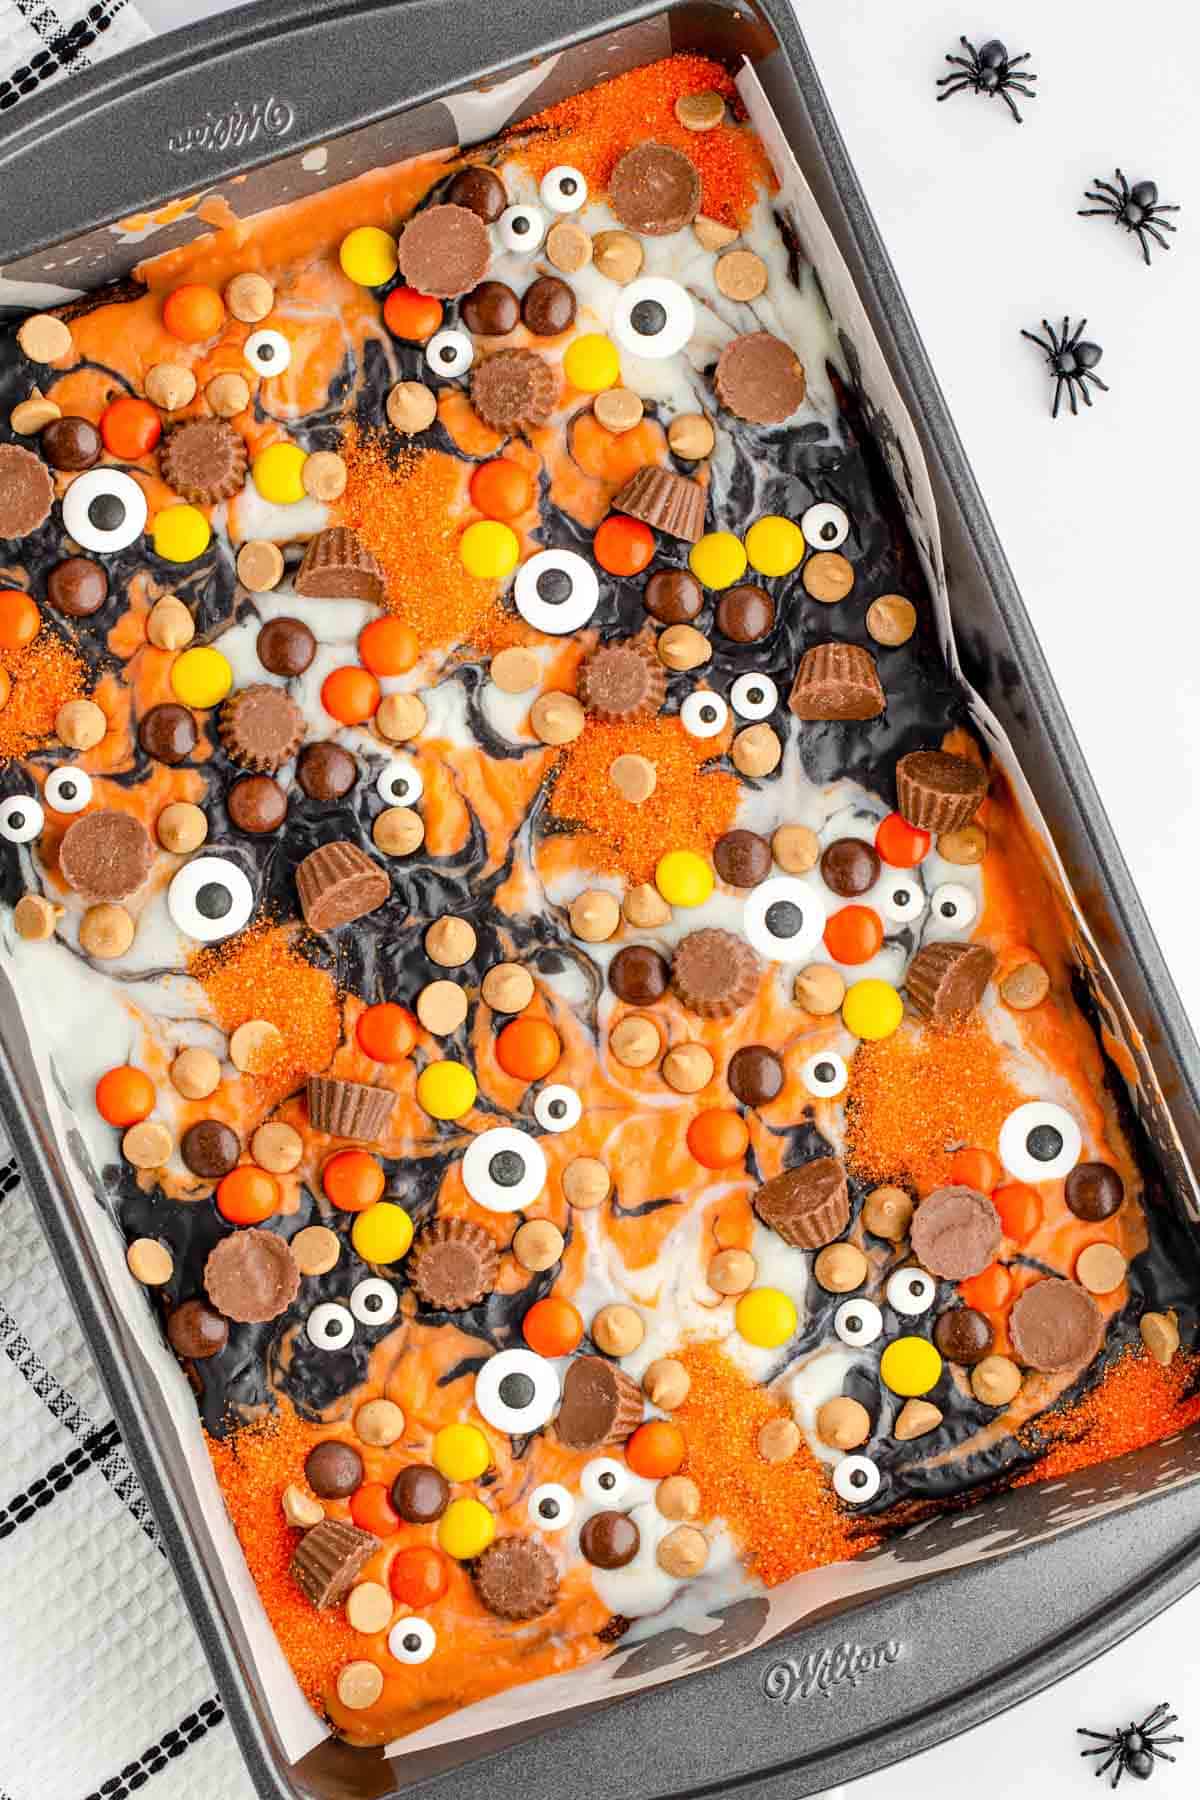 A baking pan of brownies topped with festive eyeball candies and peanut butter treats, with colors of orange, black, and white ganache.